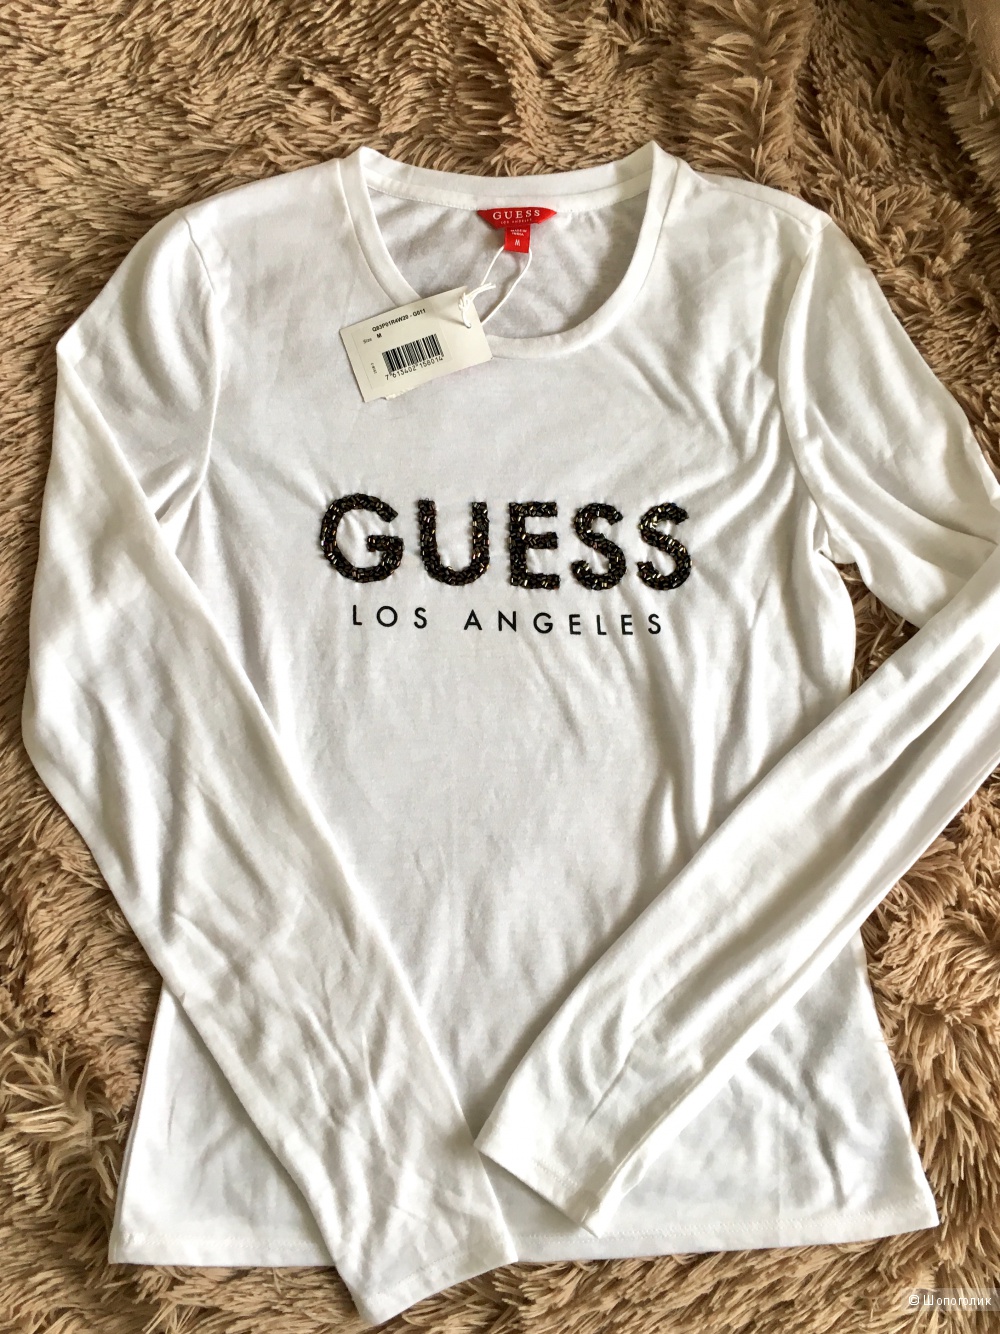 Кофта guess